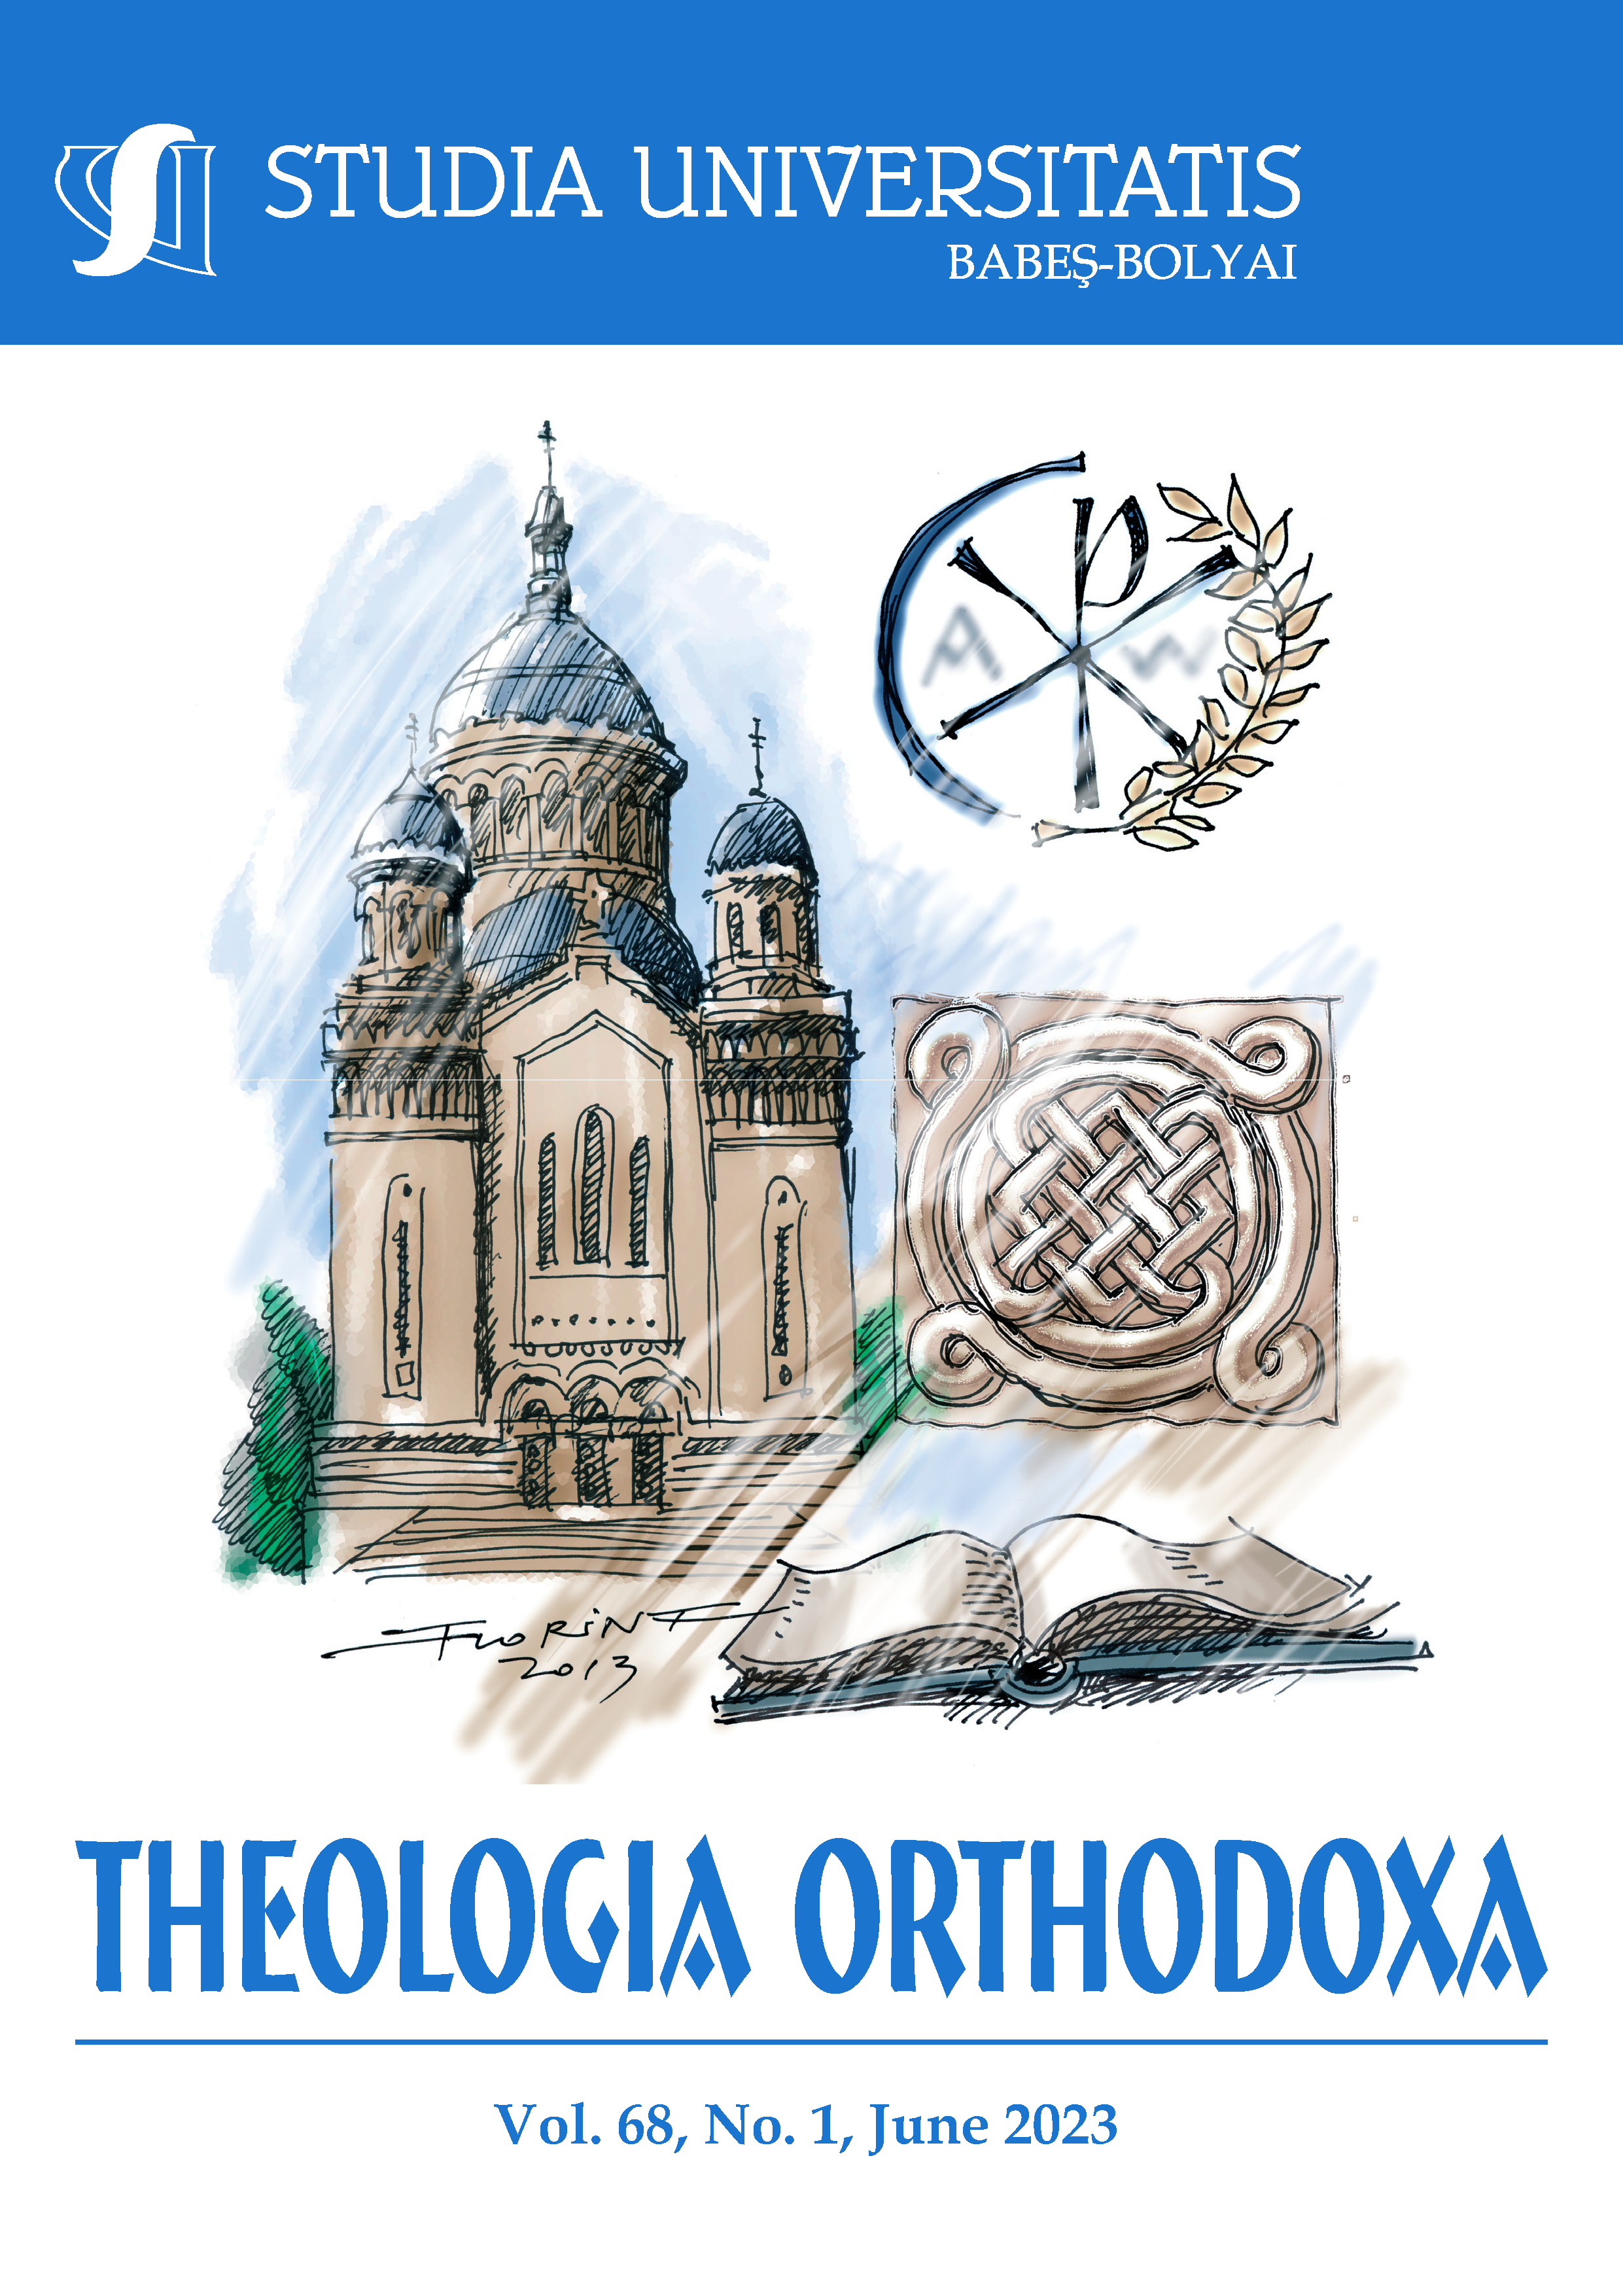 “MAKING THE LORD’S TABLE A TABLE OF DEMONS”: ORTHODOXY IN FAITH, HETERODOXY AND ORTHOPRAXY IN THE WORKS OF PACHOMIOS ROUSANOS (1508–1553)